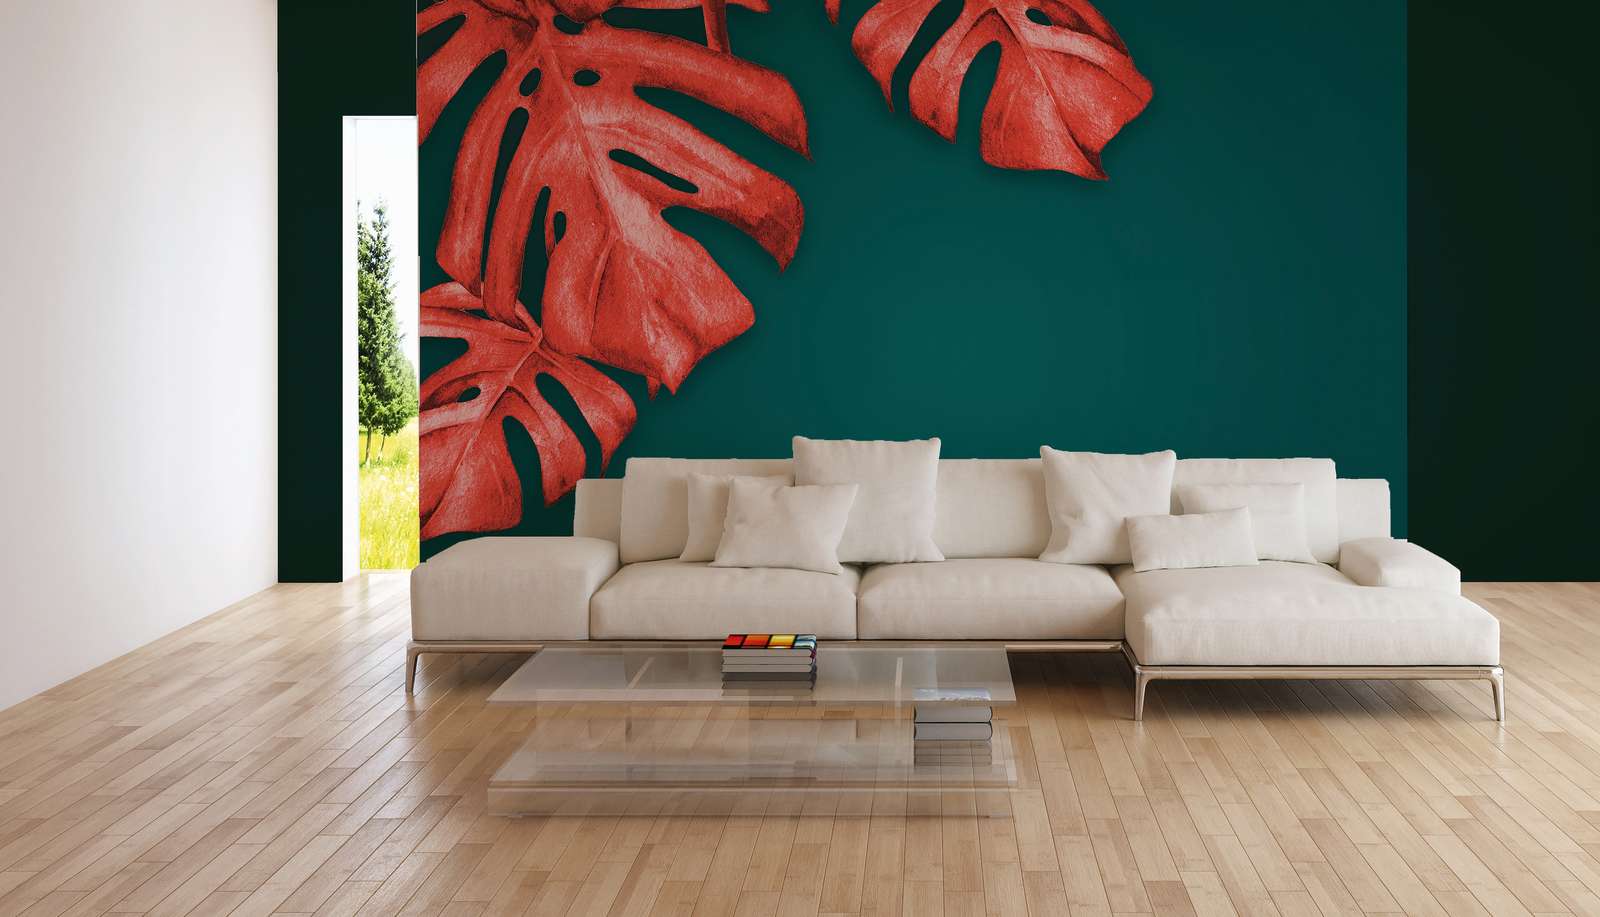             Photo wallpaper with drawn palm tree - red, turquoise
        